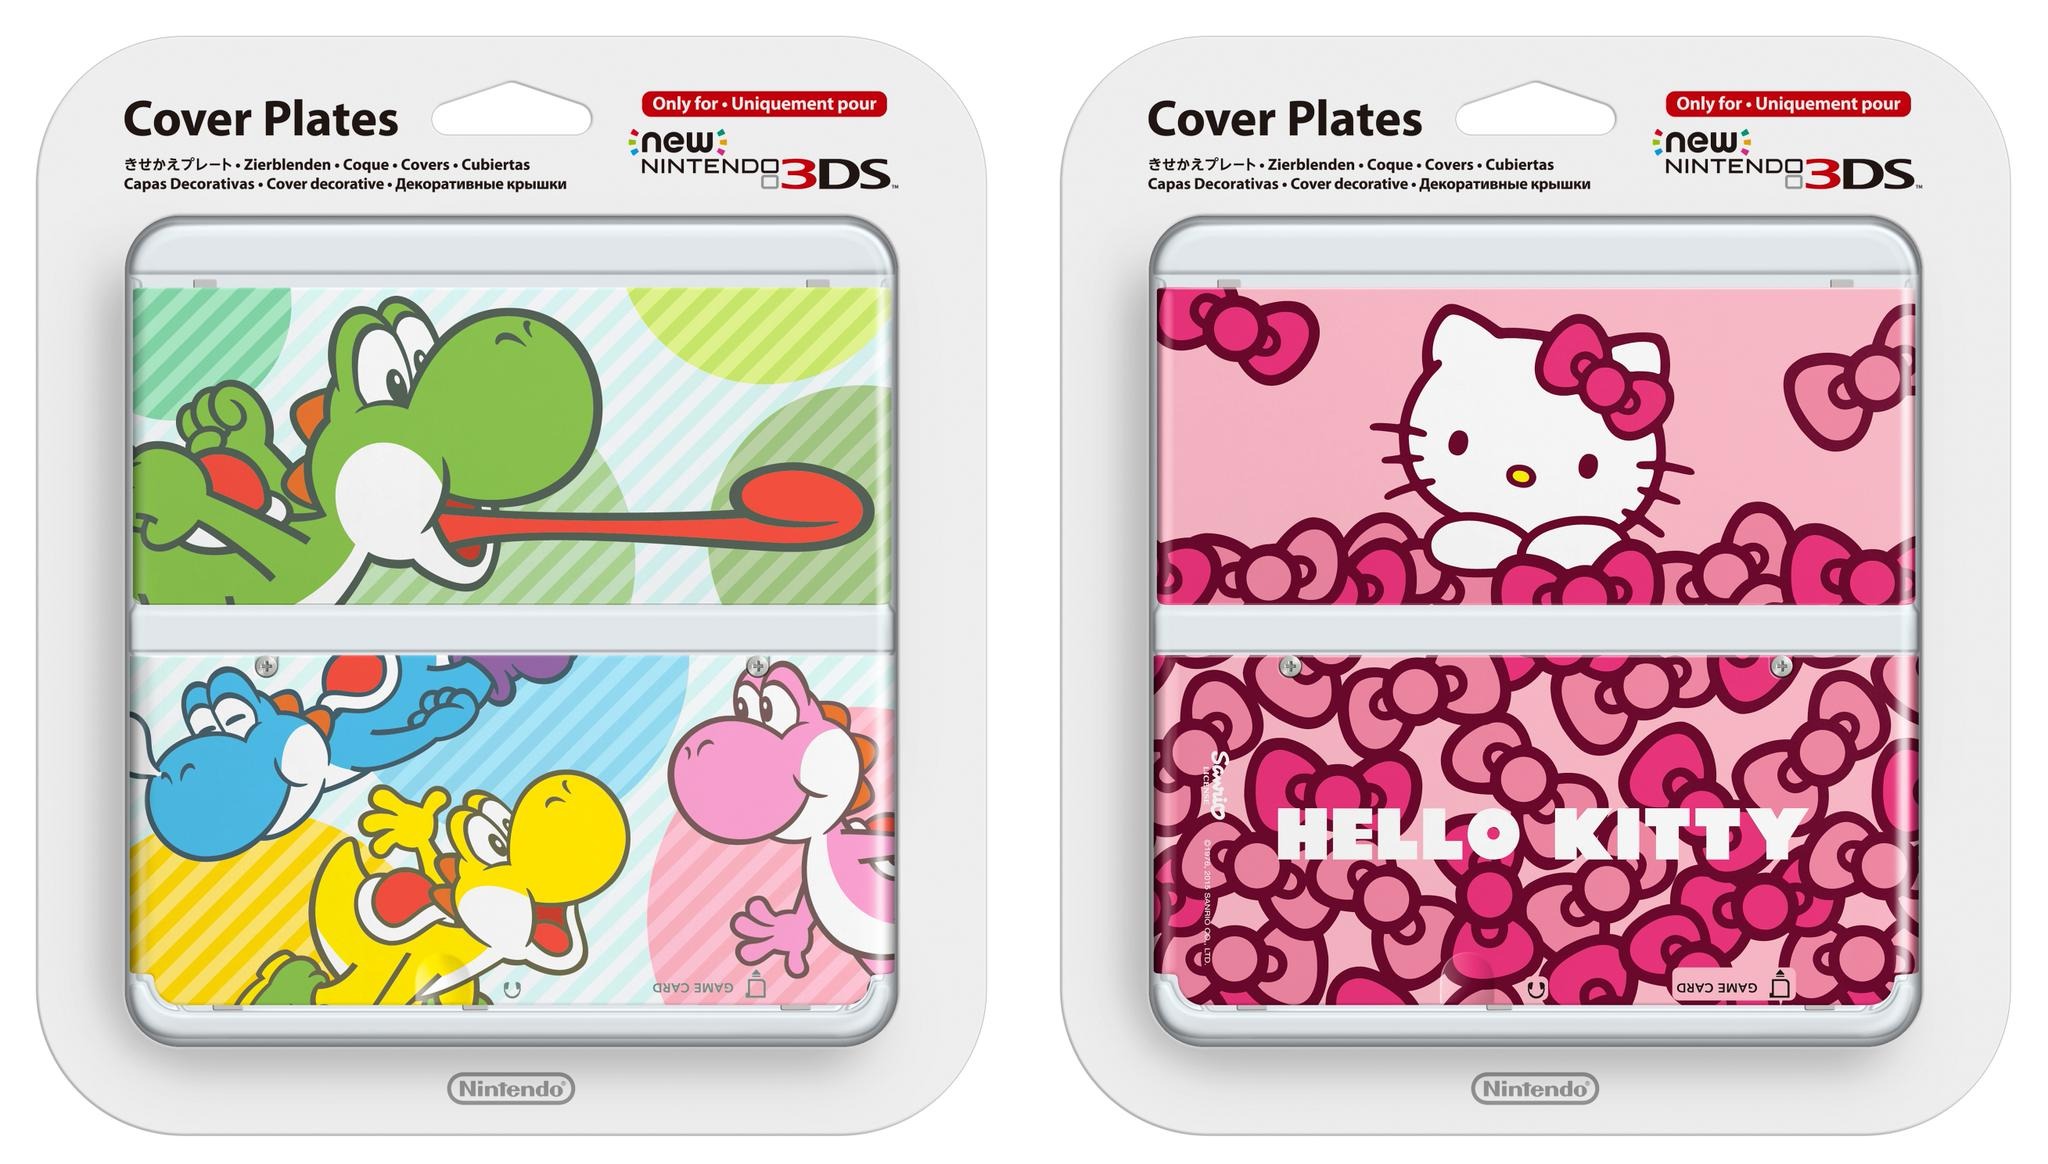 Citron brug valg Images of Europe's upcoming Yoshi and Hello Kitty New 3DS cover plates